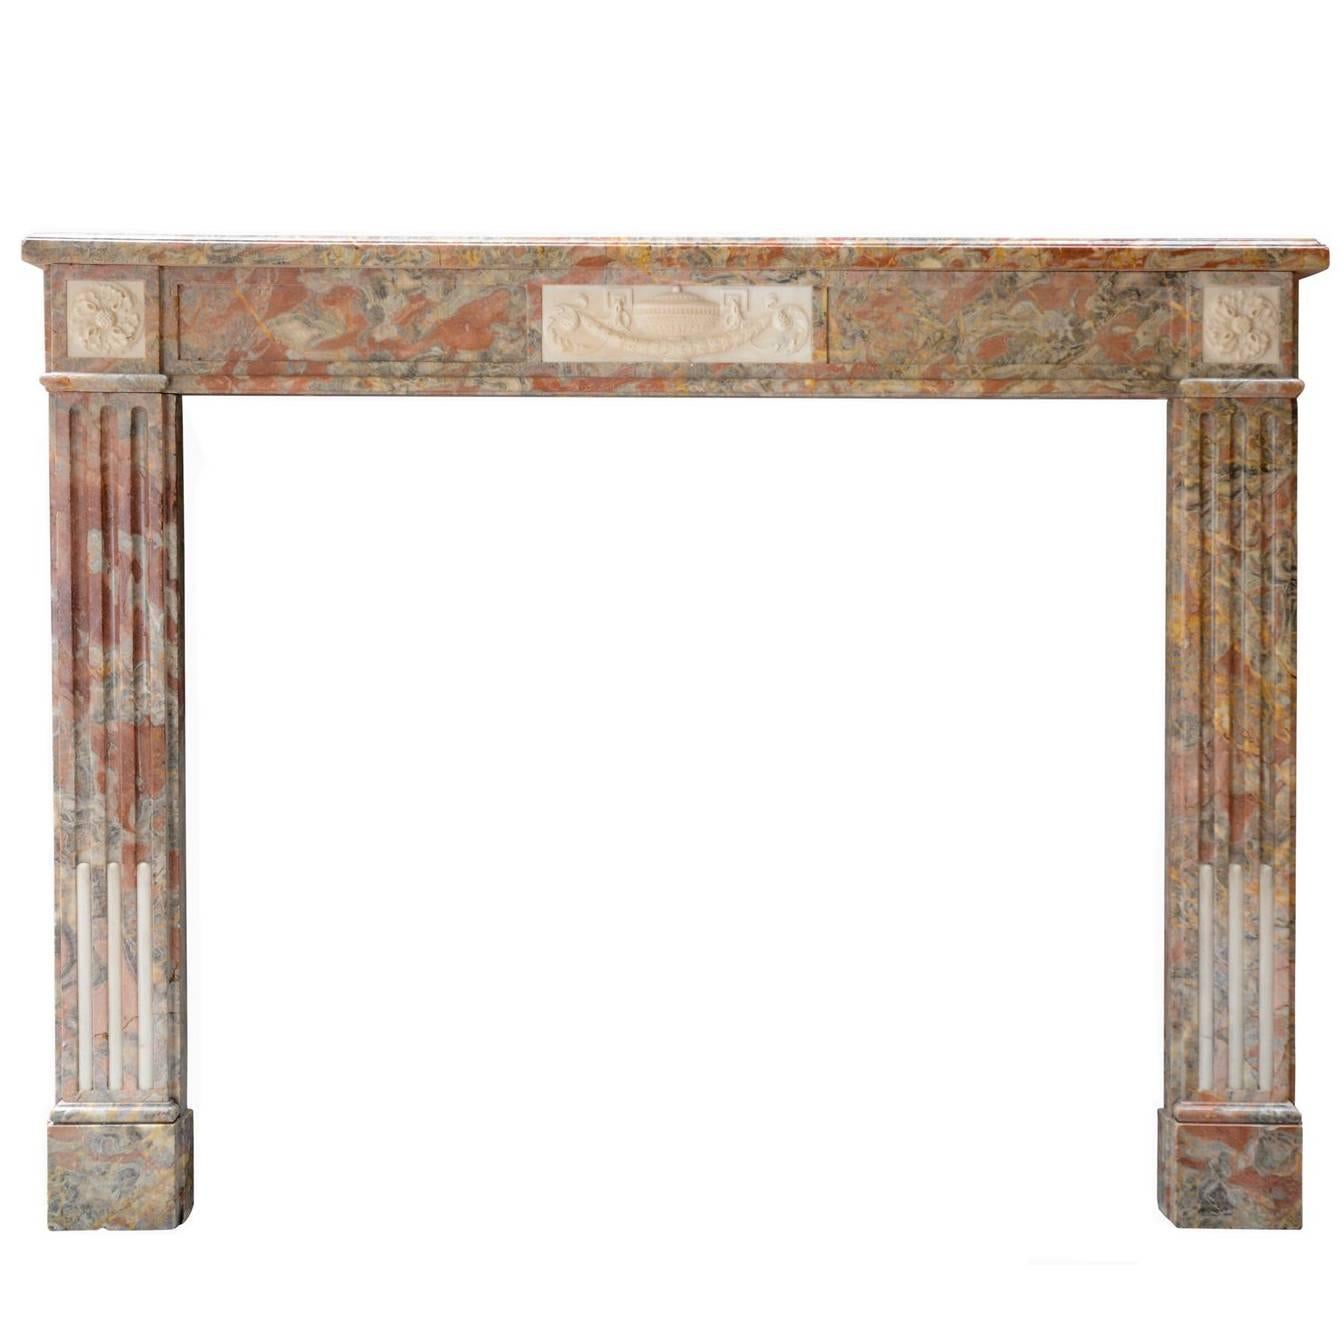 Louis XVI Languedoc Red Marble Fireplace, 18th Century For Sale